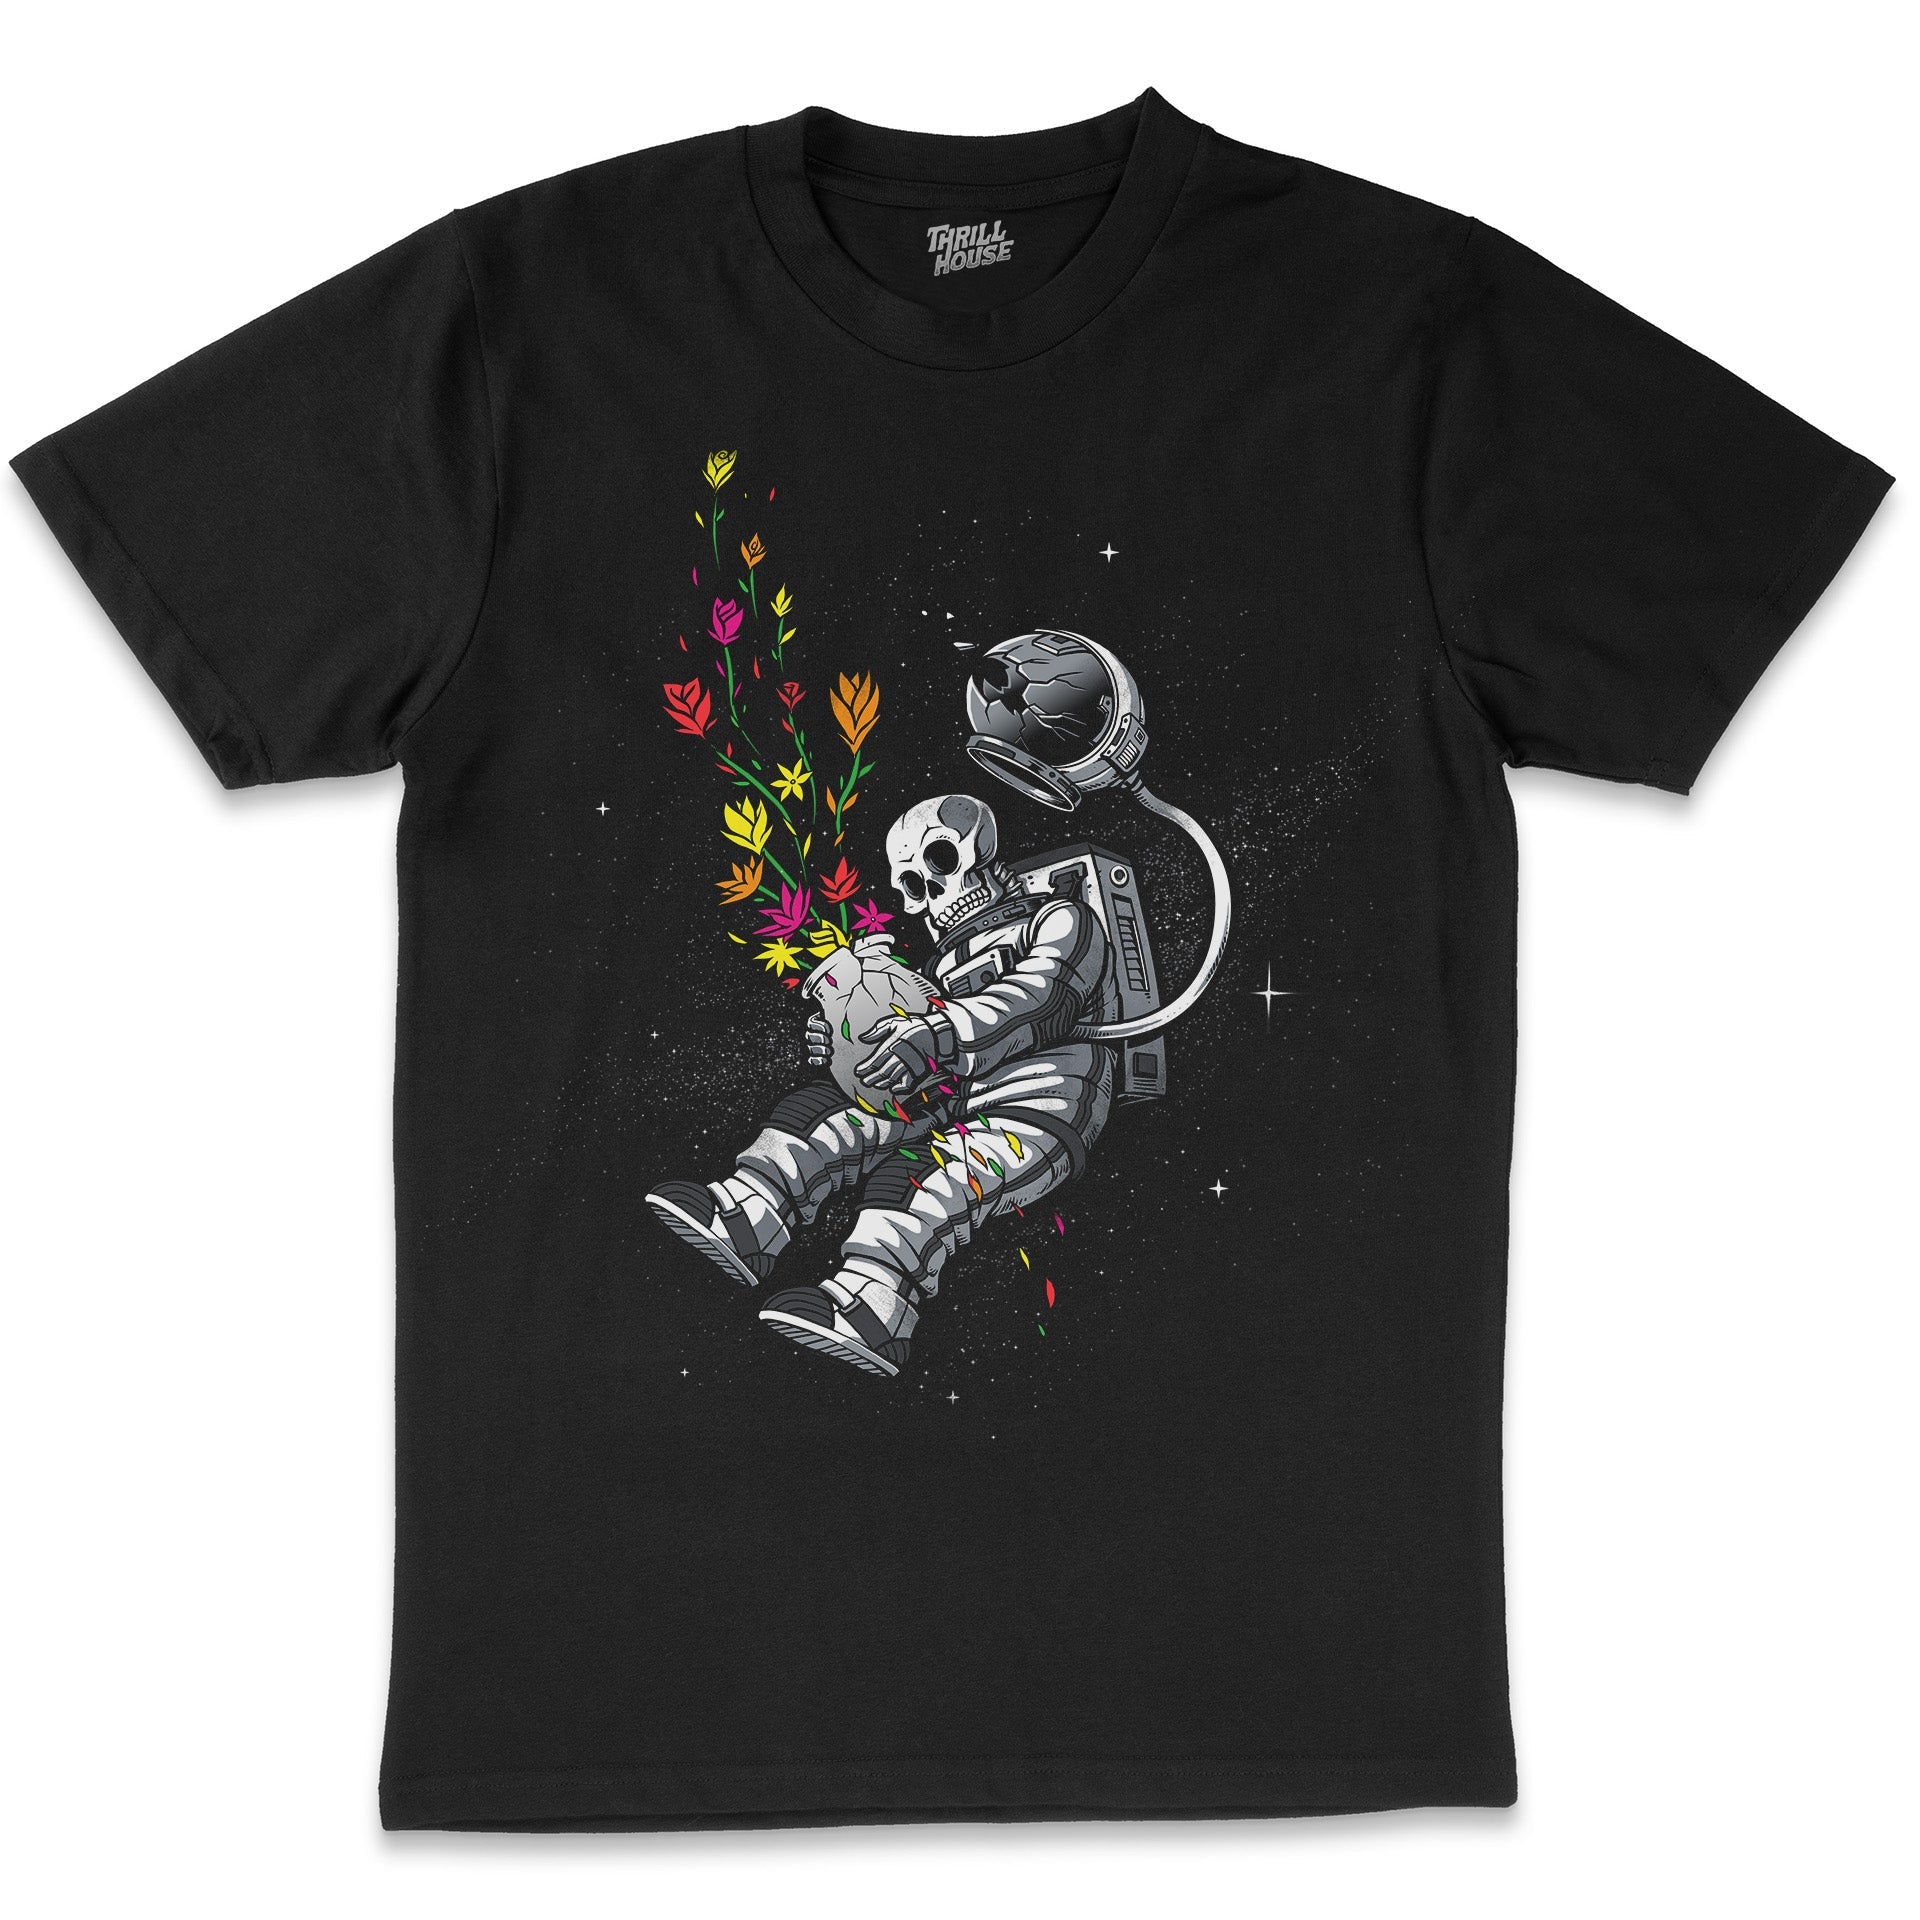 End of Humanity Space Skull Skeleton Astronaut Flowers Solar System Artsy Cotton T-Shirt